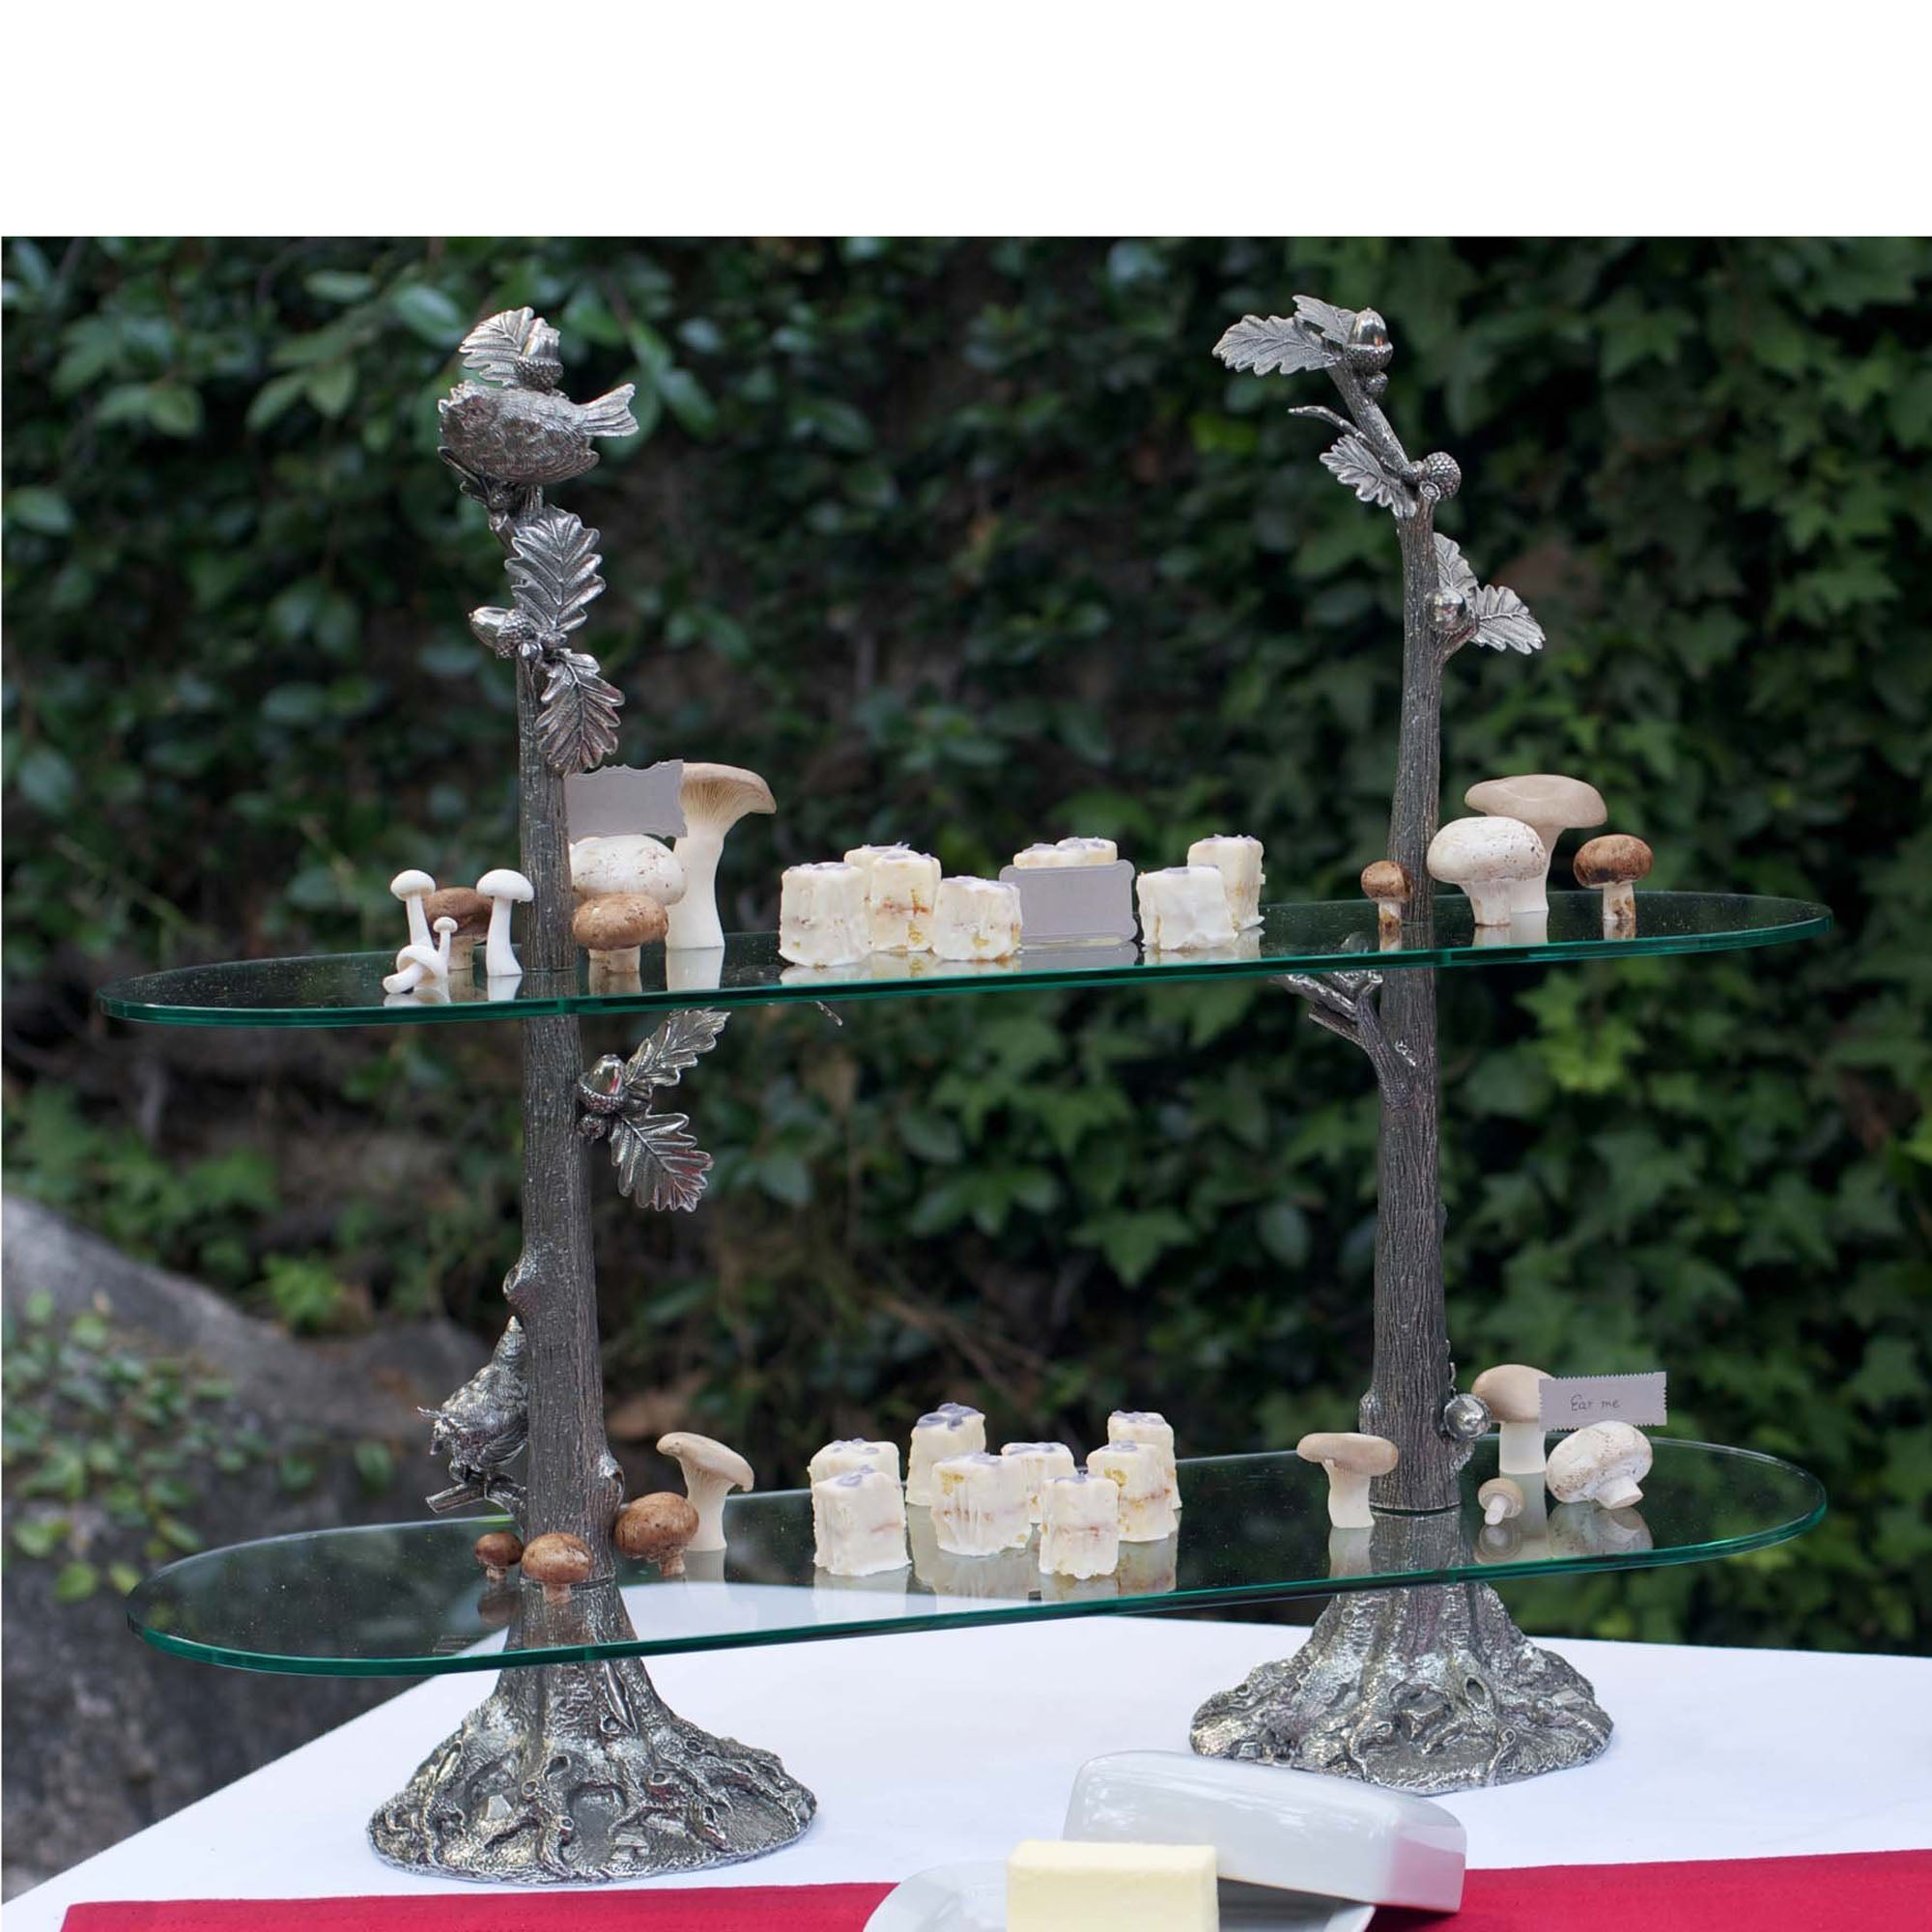 Vagabond House Song Birds Bistro Stand Product Image